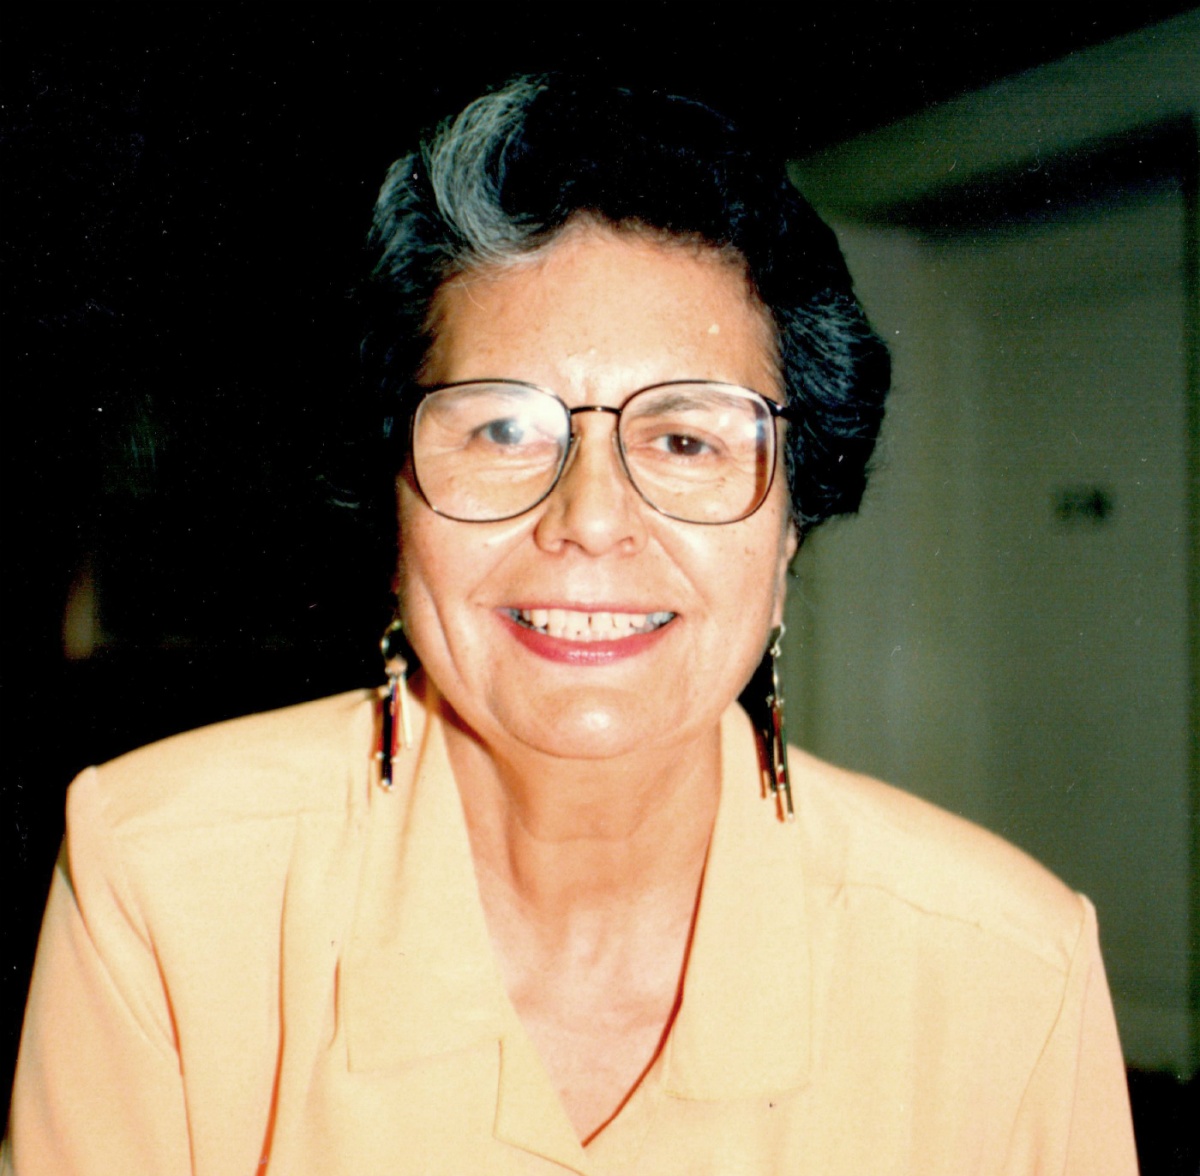 Ada Deer - a woman with dark hair and glasses - smiles at the camera.